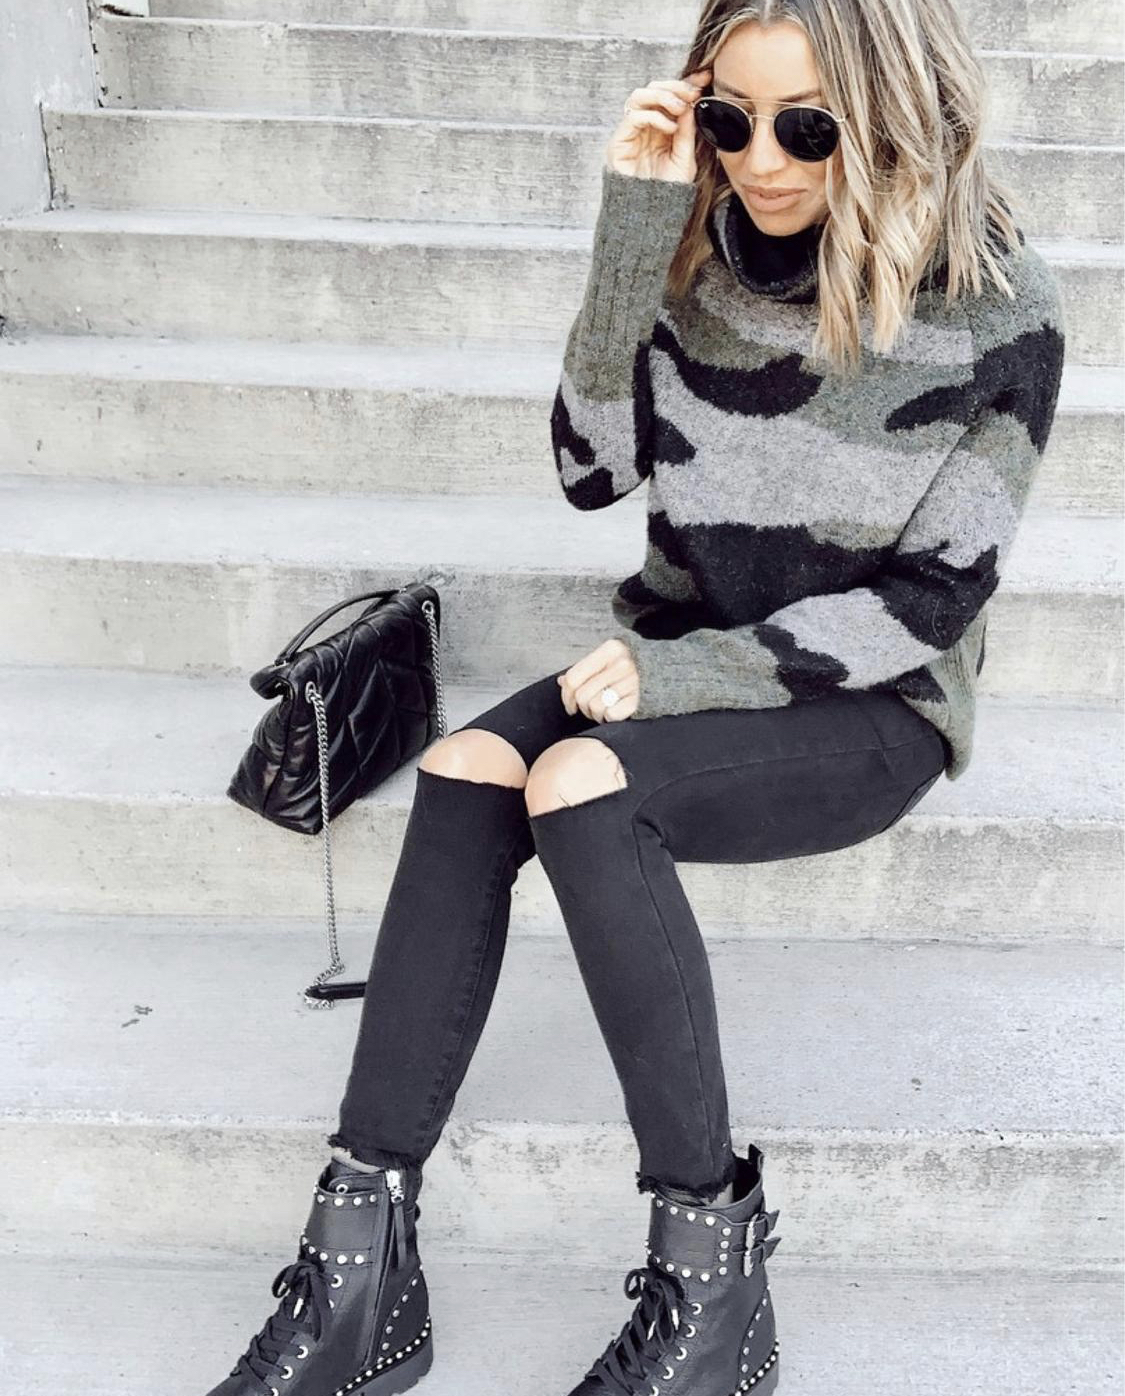 jaime-shrayber-how-to-wear-combat-boots-with-skinny-jeans - The Real  Fashionista